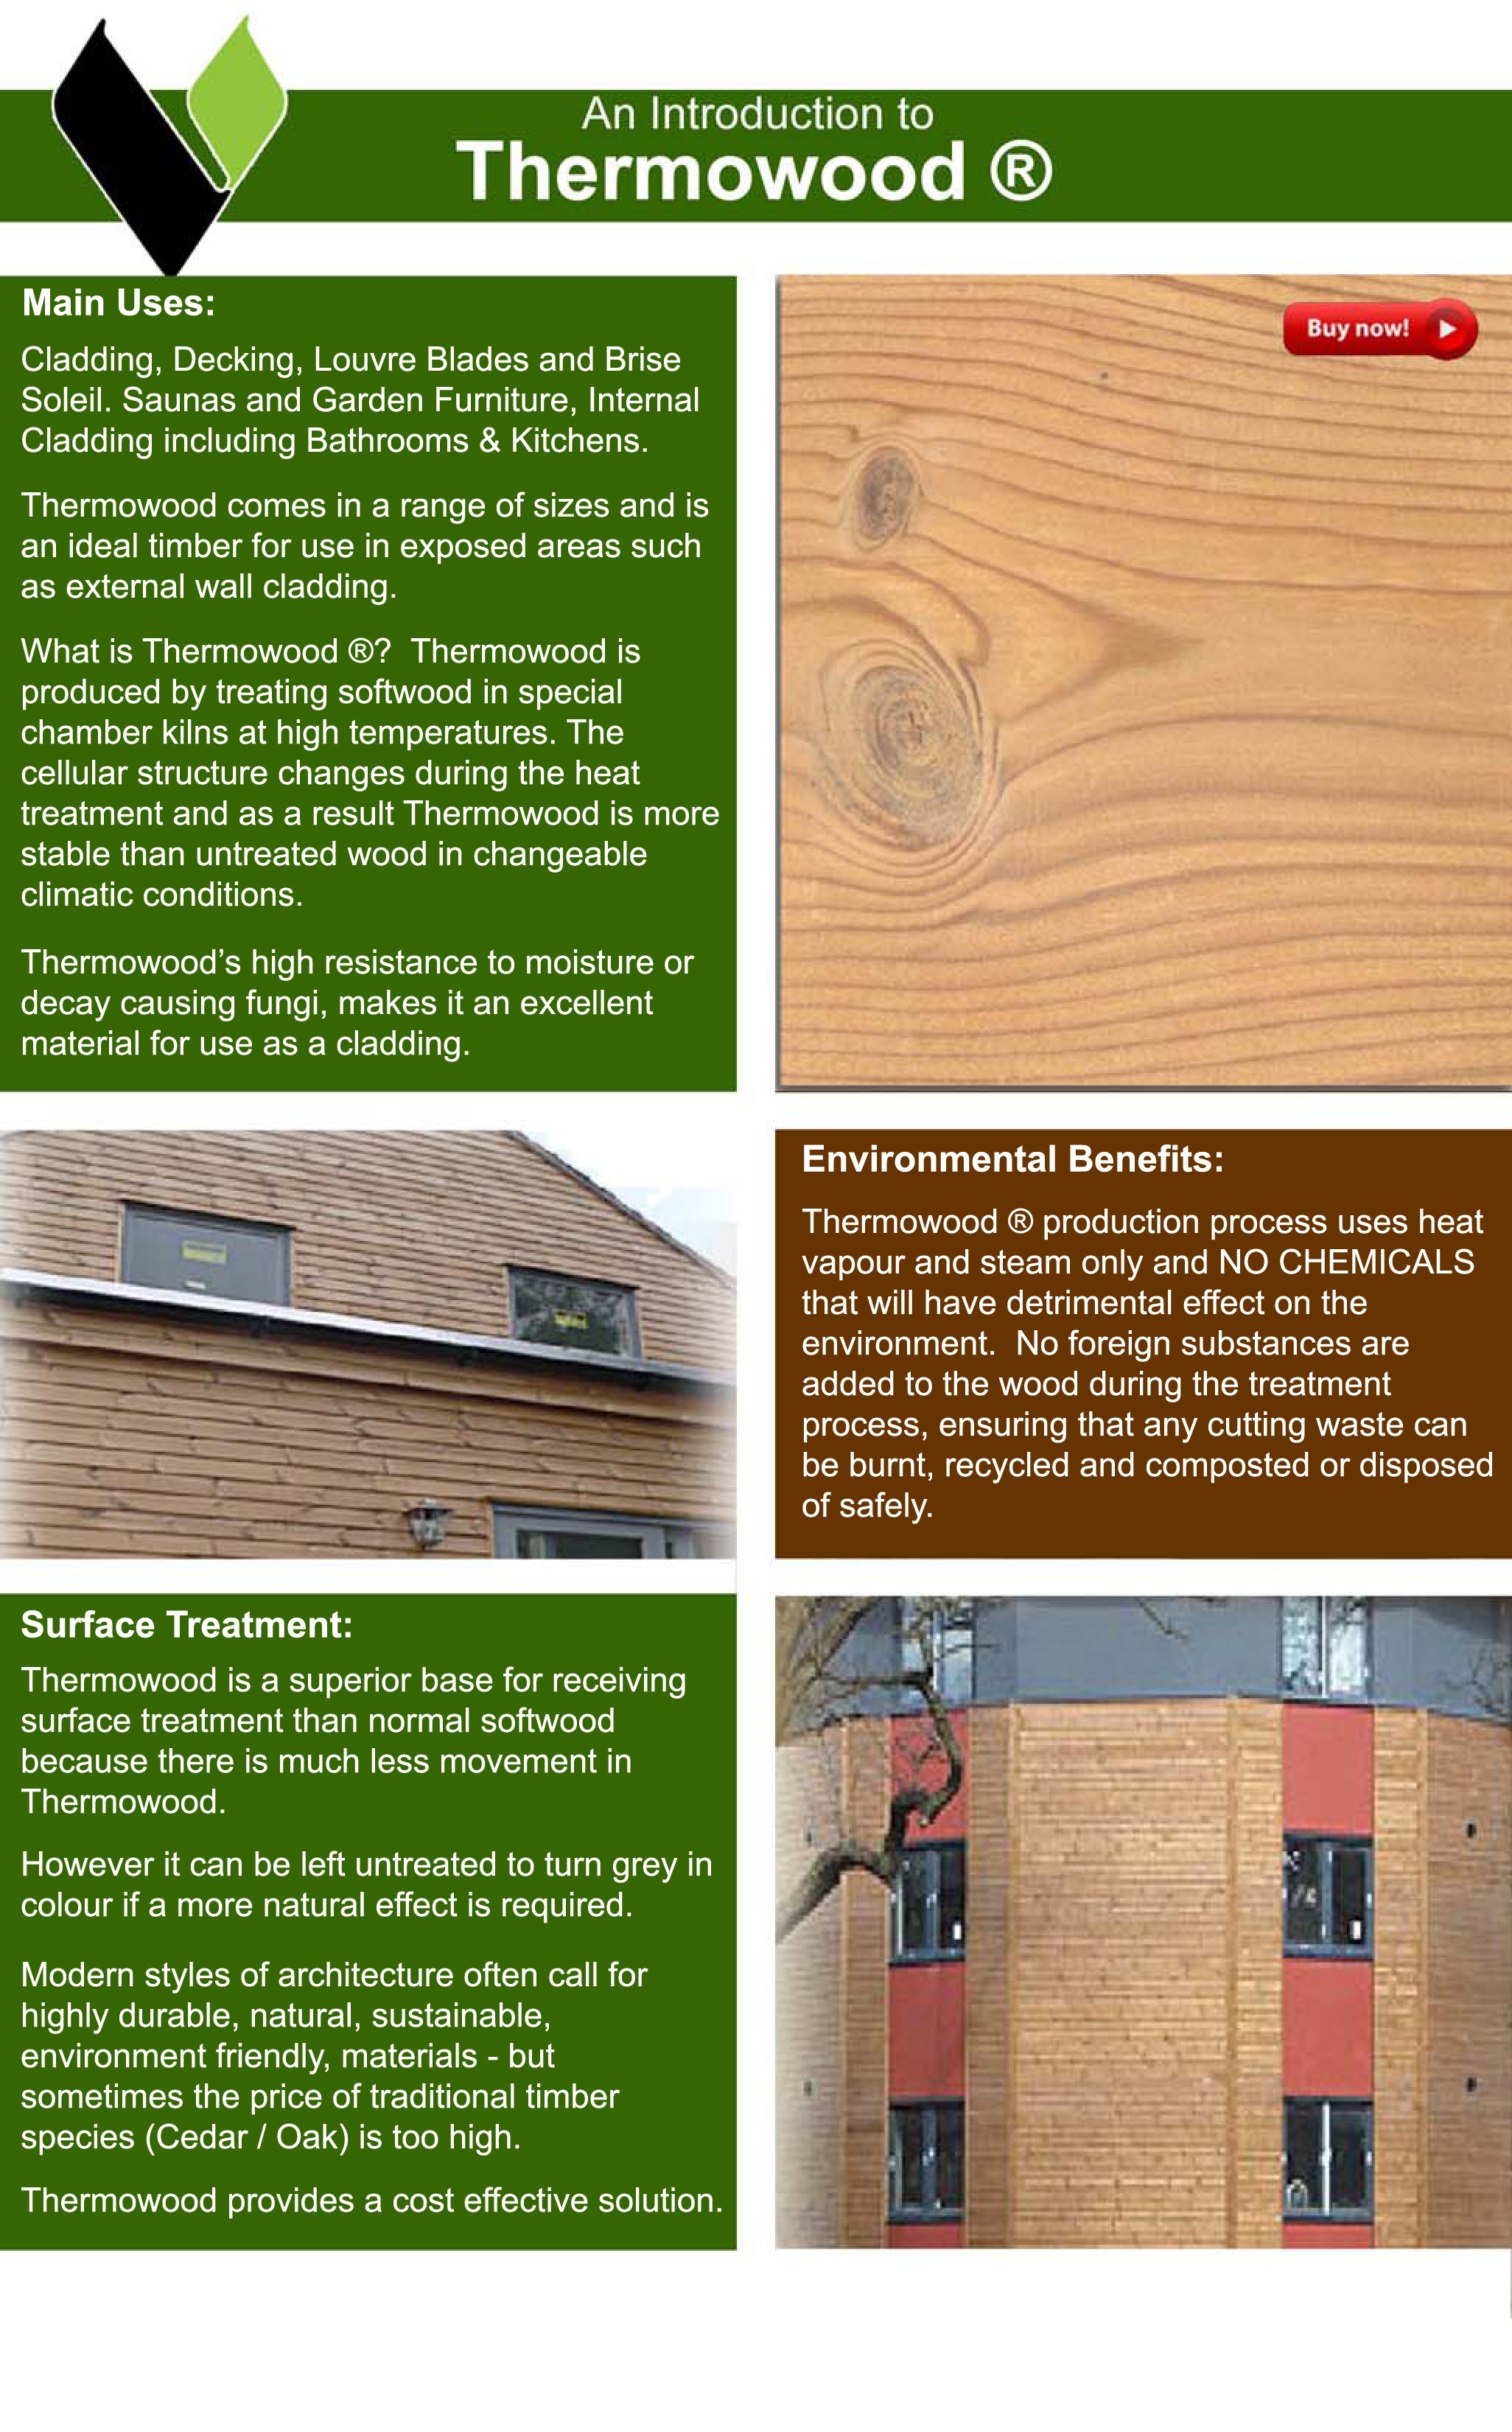 Overview of Thermowood